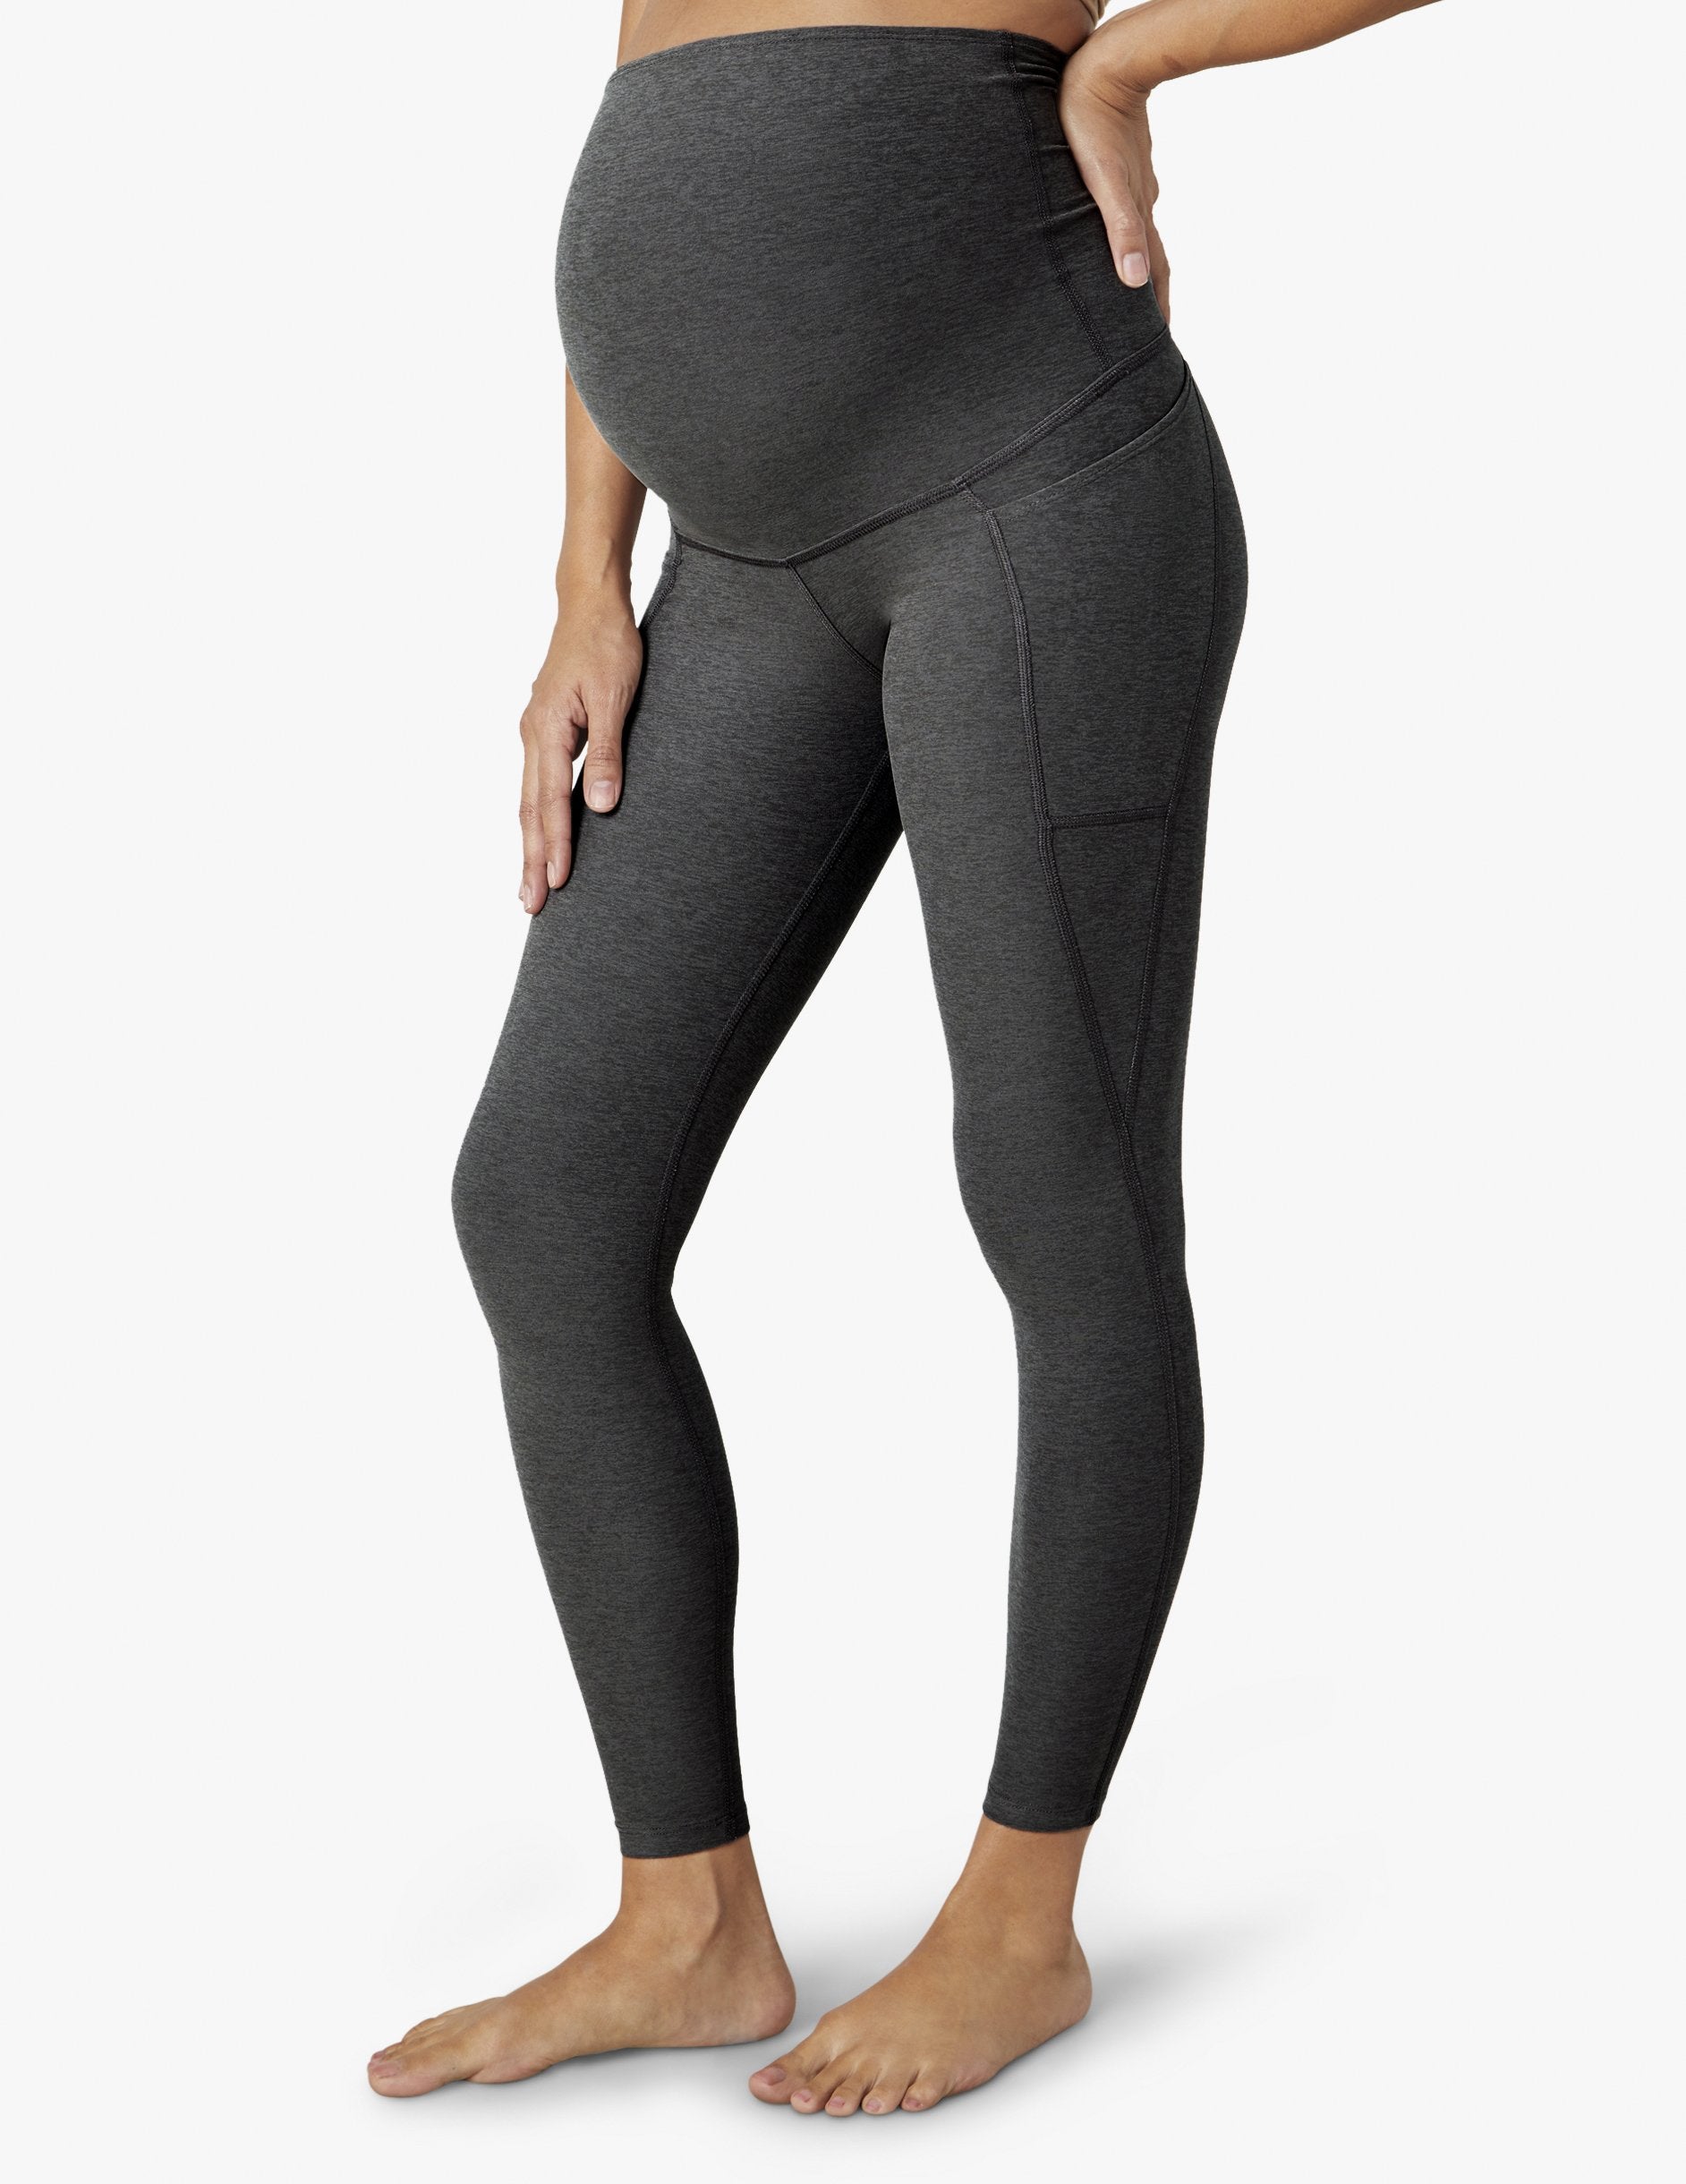 Beyond Yoga Out of Pocket Maternity Leggings MSRP $110 Size М, TR 1474